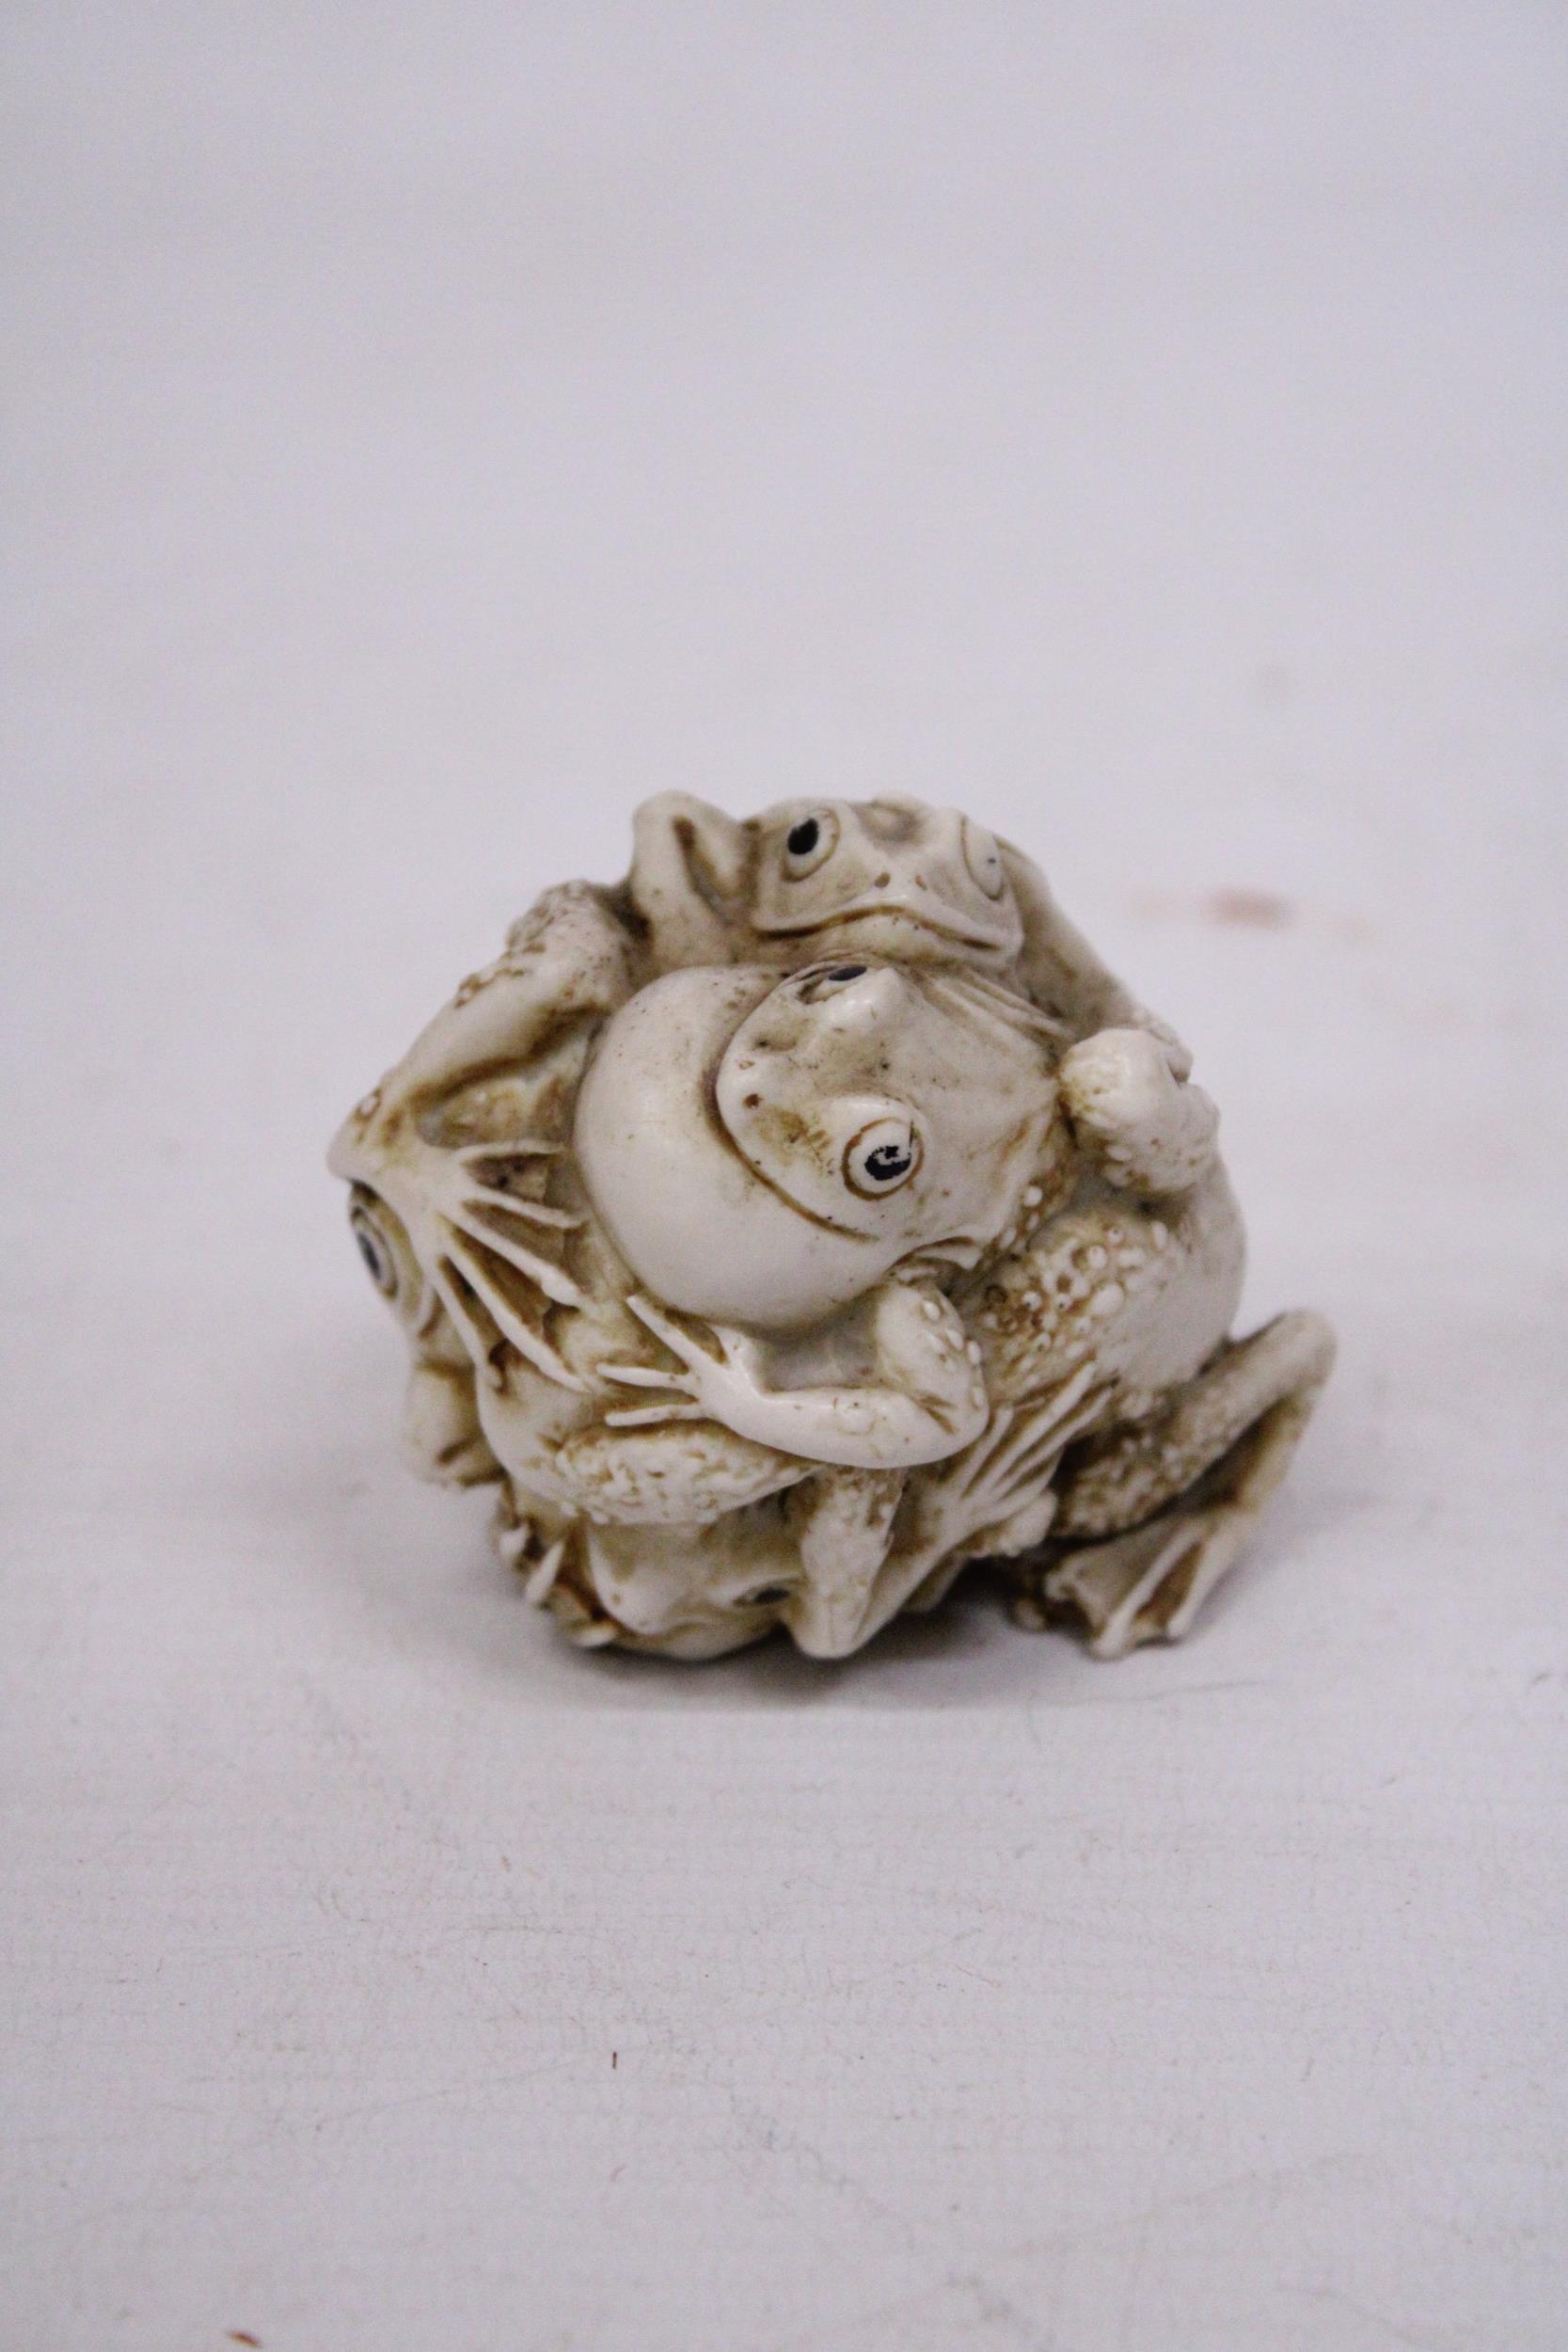 A HAND CARVED ORIENTAL FROG ORNAMENT